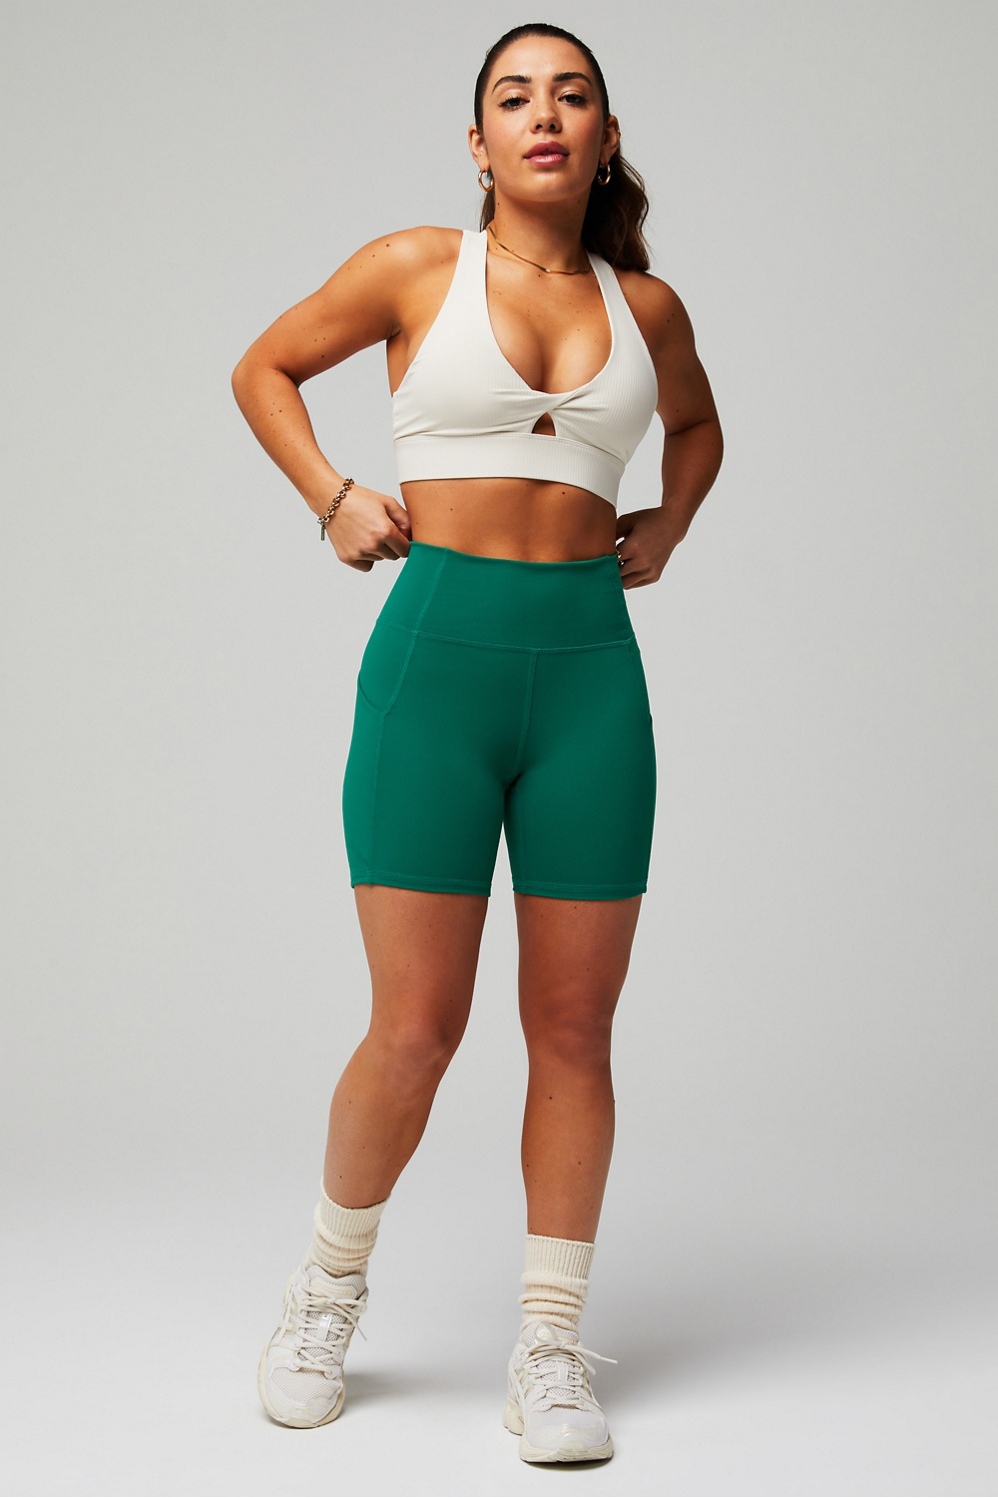 Oasis PureLuxe High-Waisted 6'' Short - Fabletics Canada